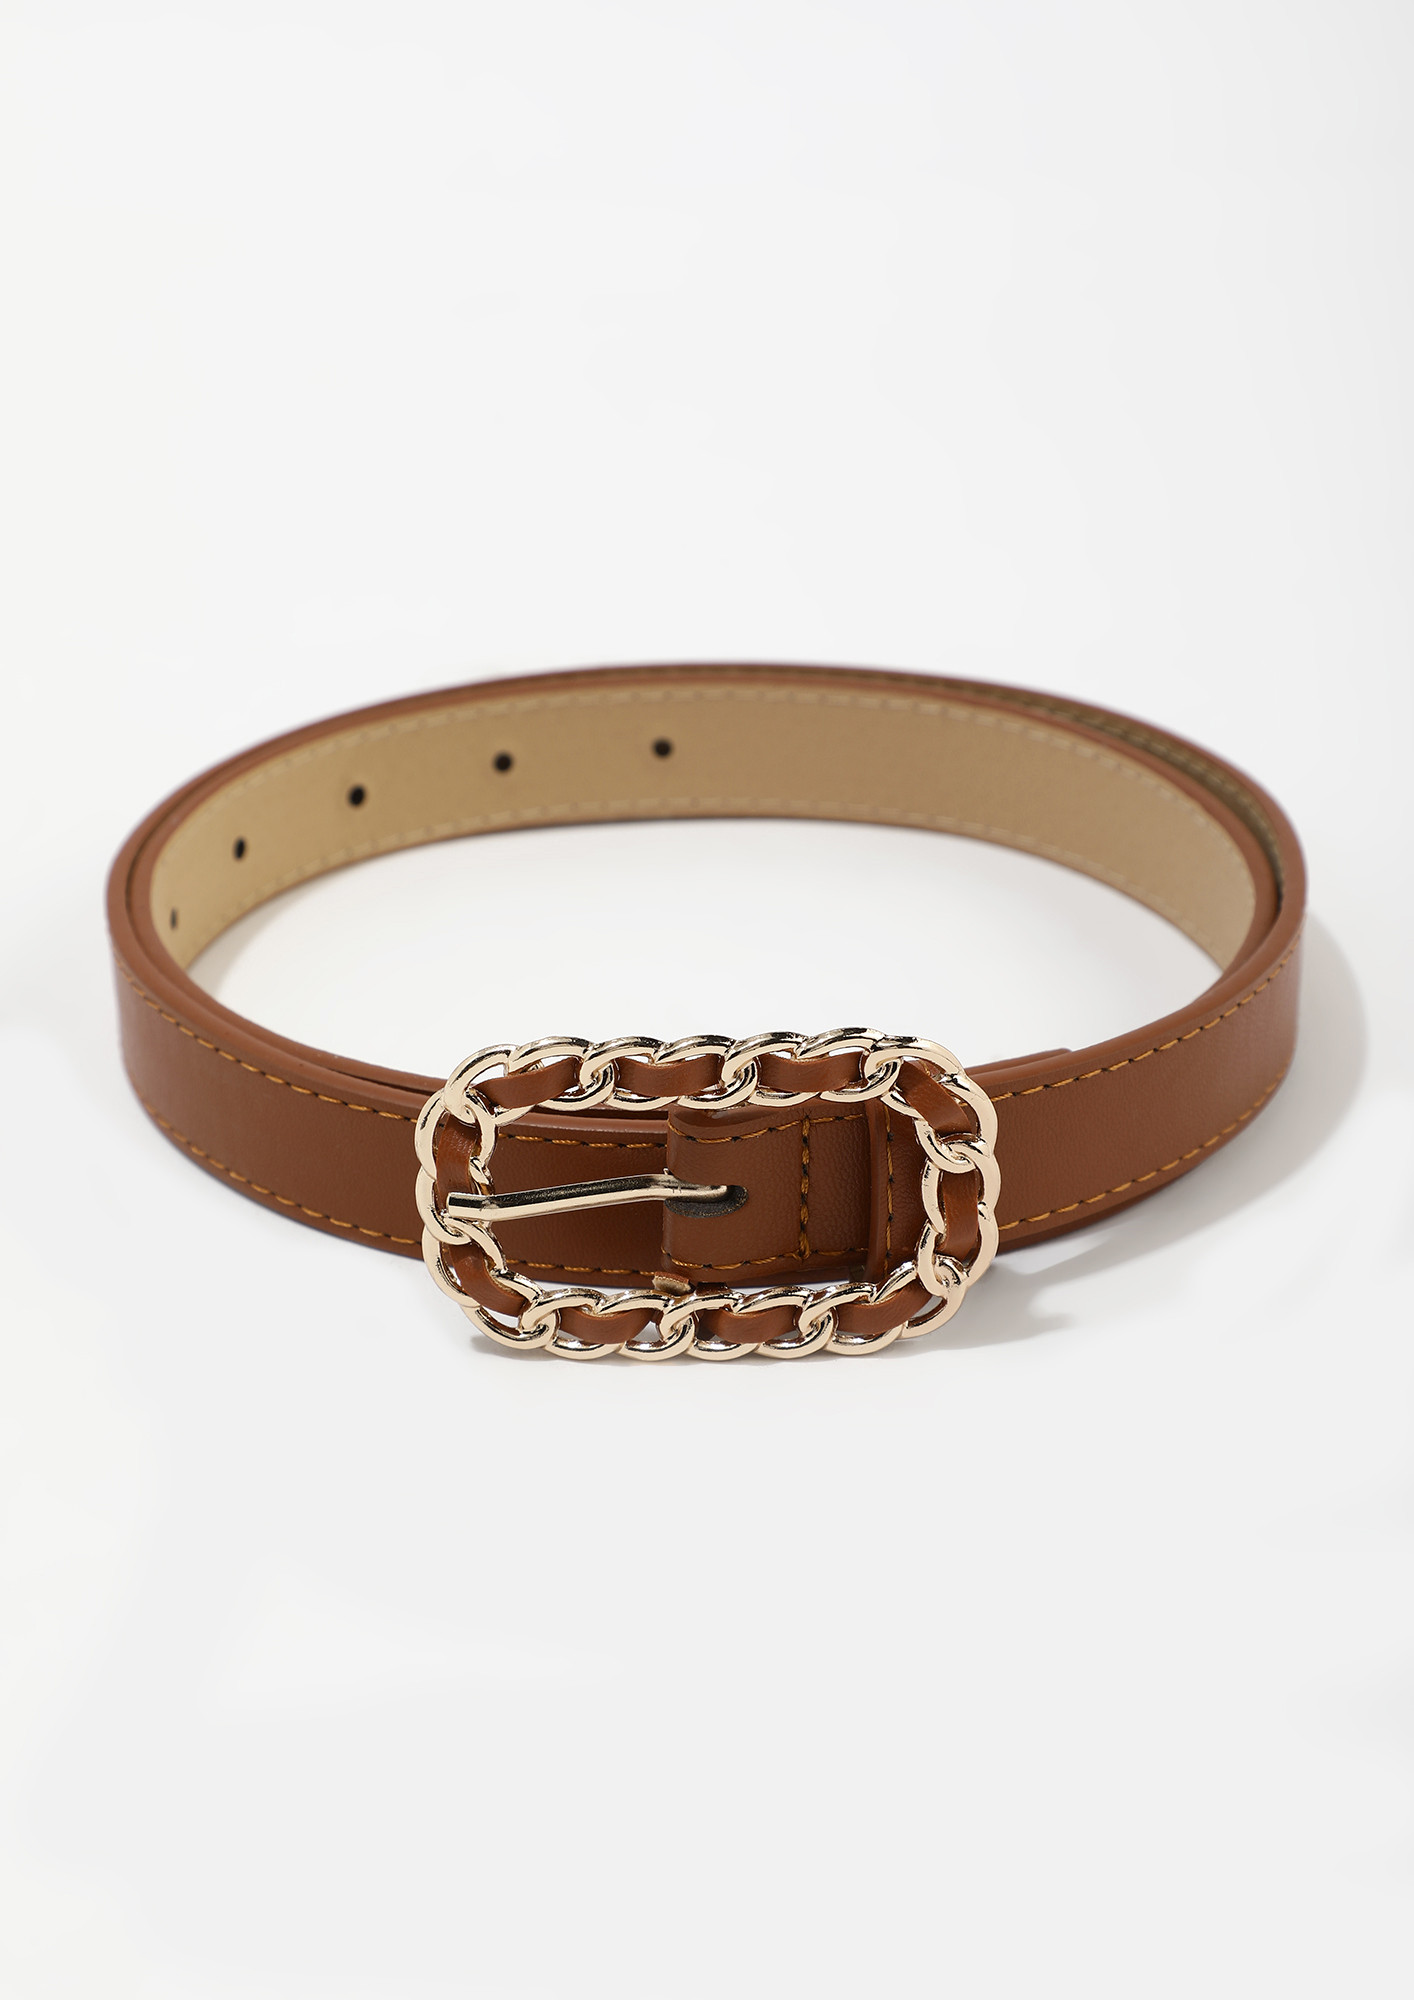 WEAR ME ON THE OOMPH DAYS CAMEL BELT